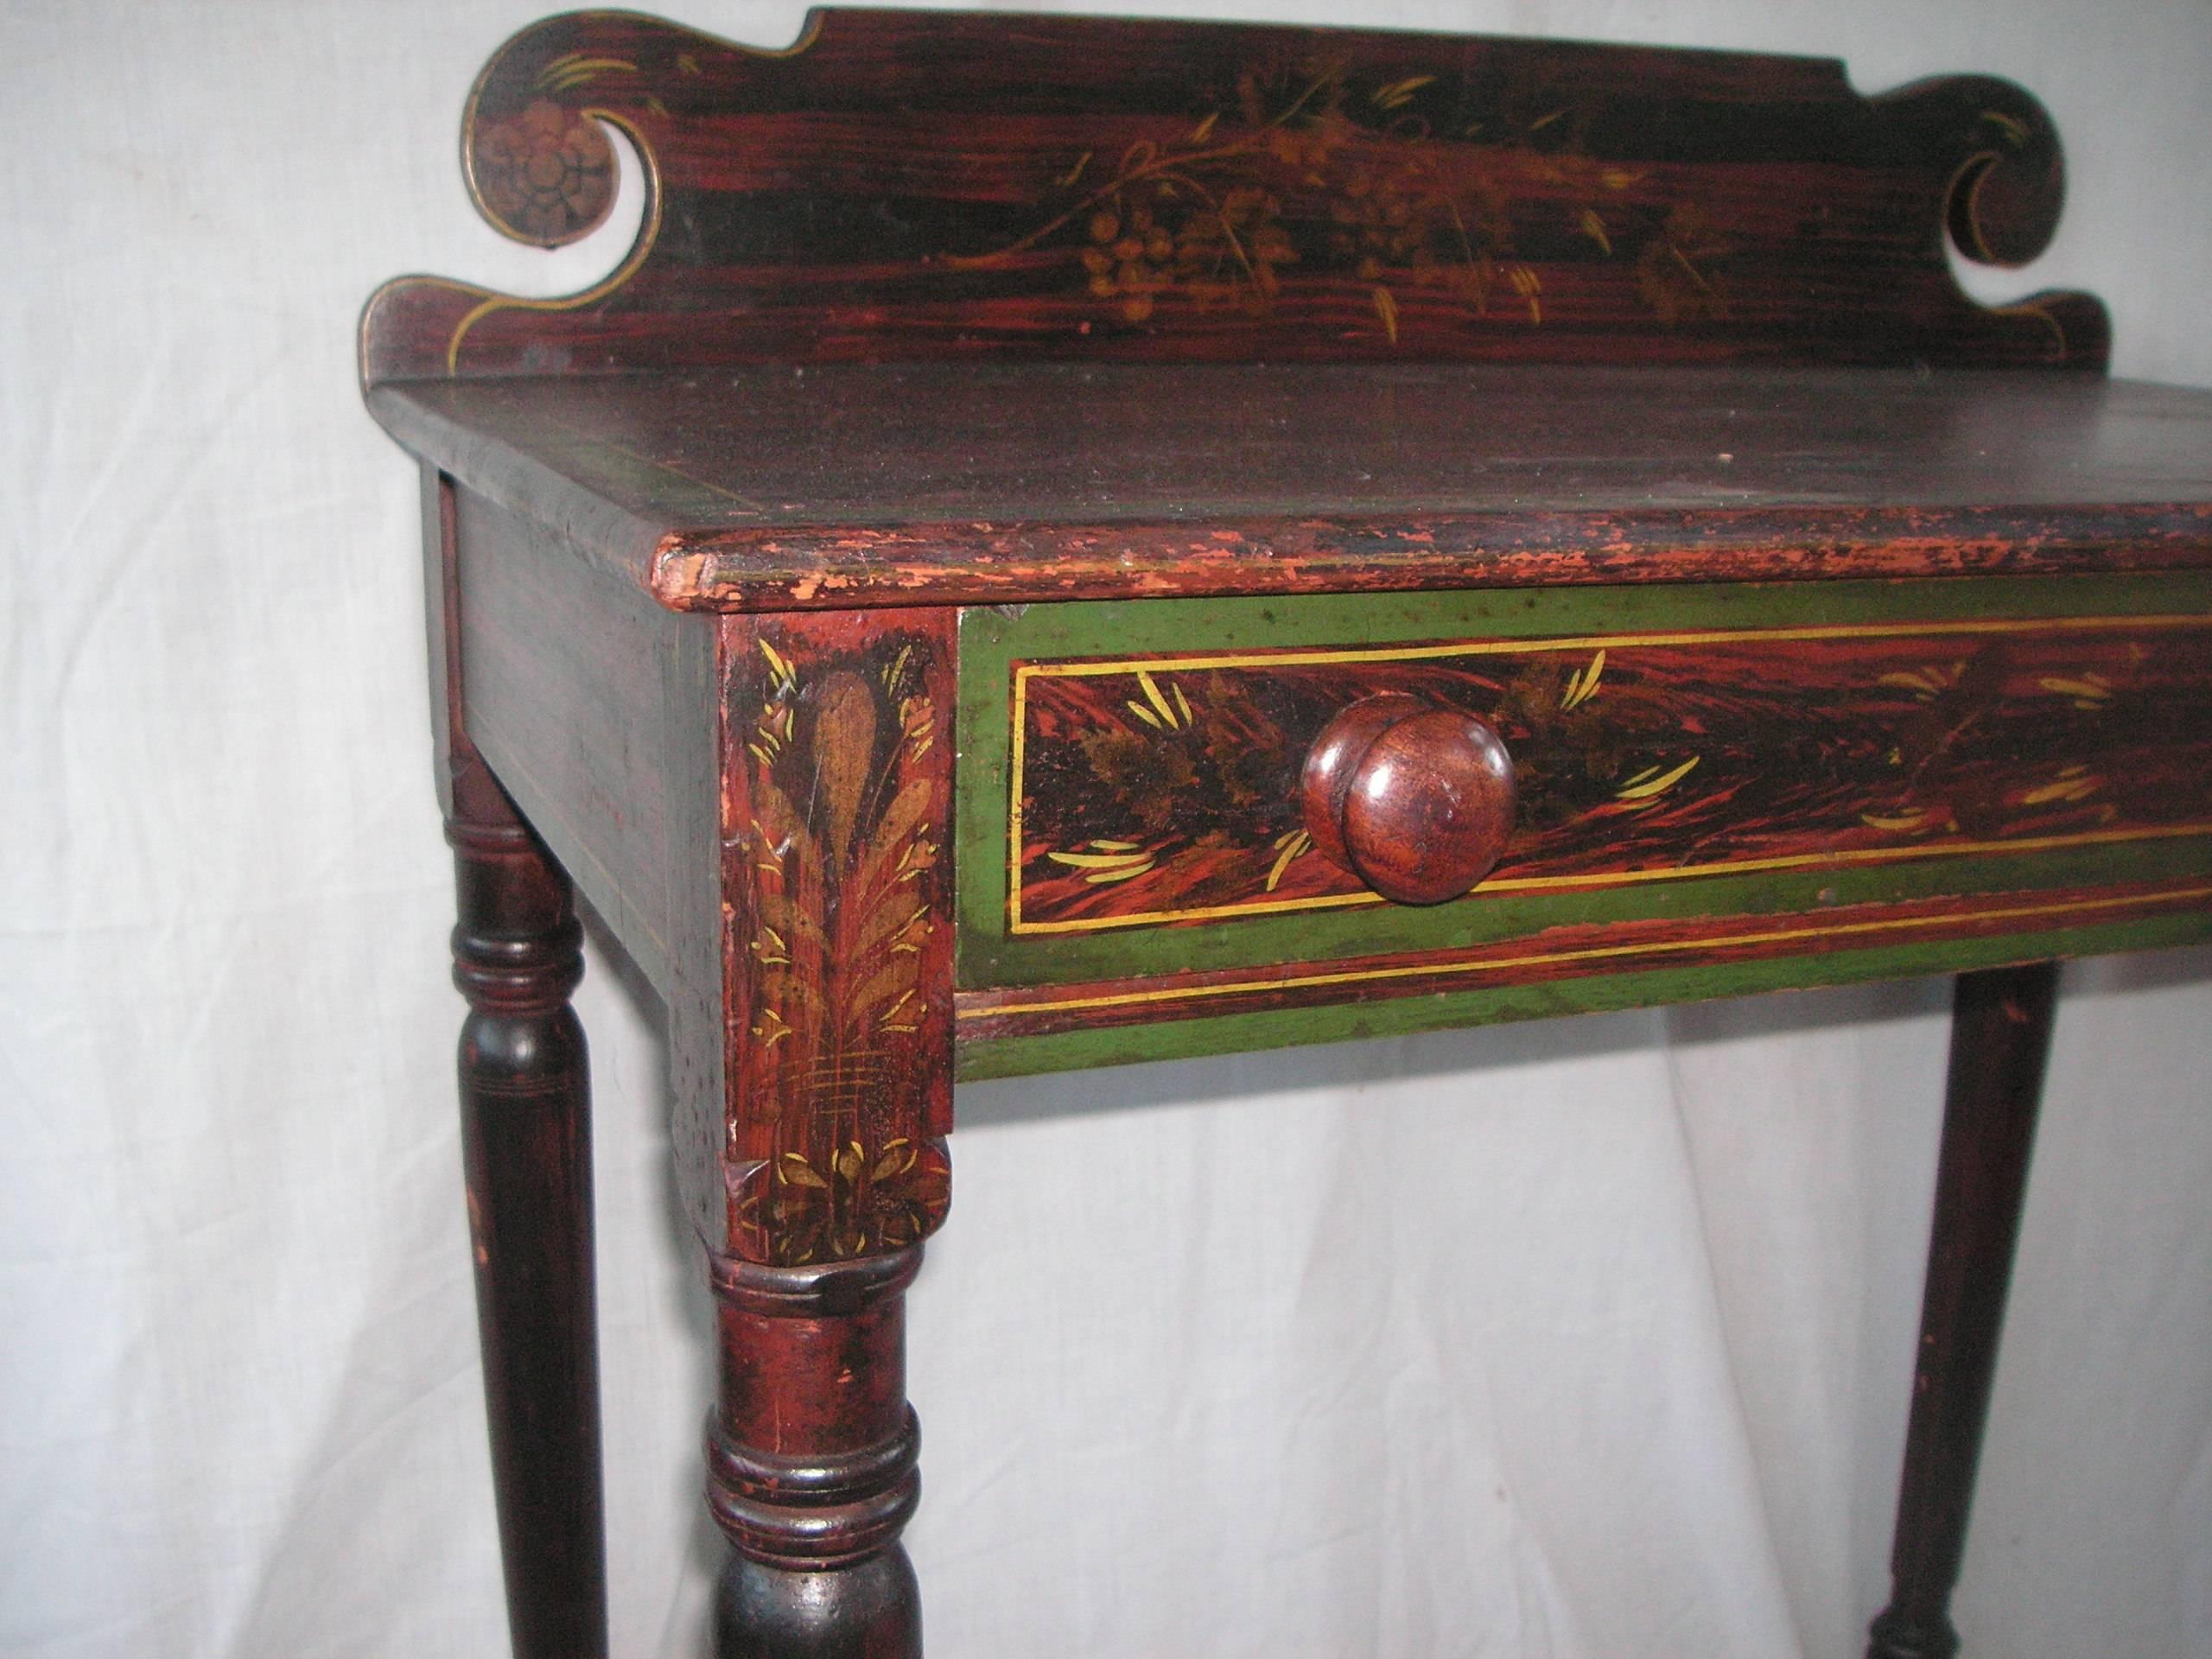 Mid-19th century New England one drawer dressing table with original paint. The paint decoration is faux rosewood with green and yellow striping and gold stenciling. It is in very good condition with lovely notched detail at the top of the front